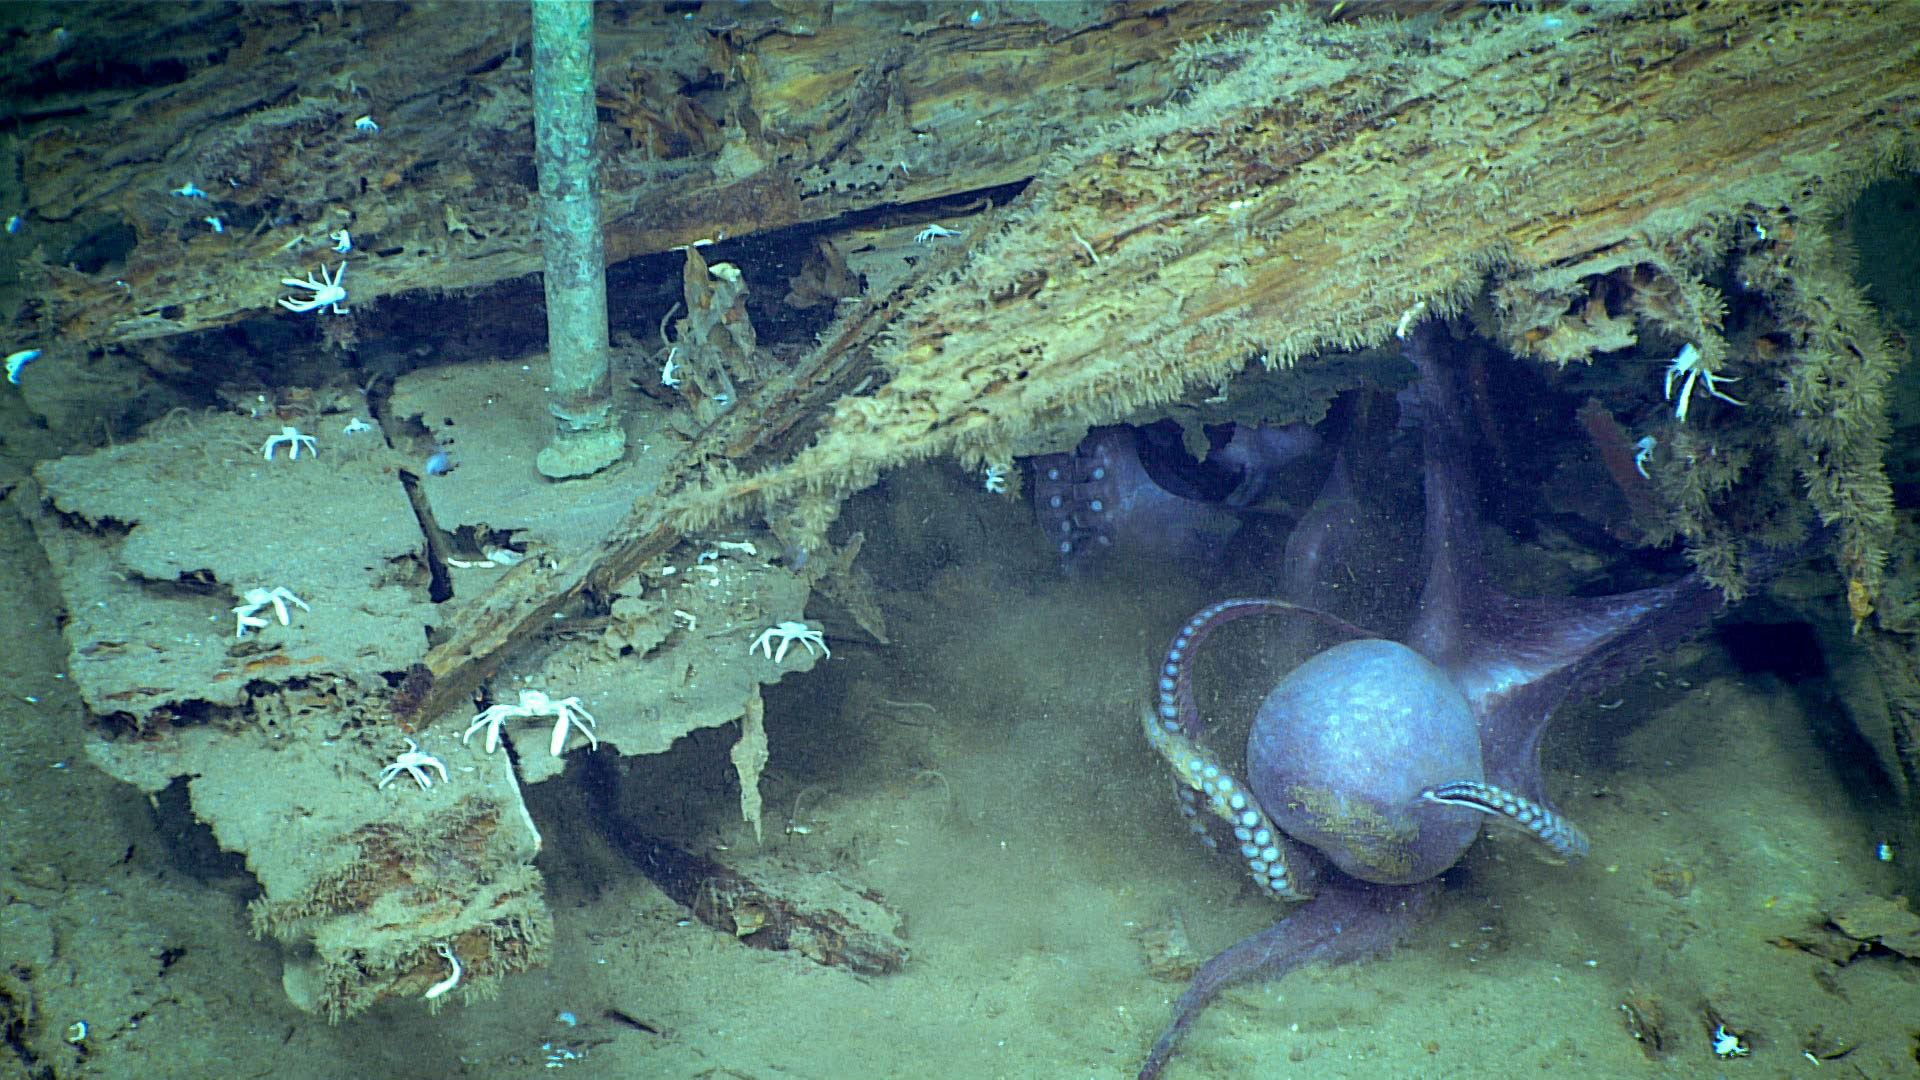 Figure 6. Two Muusoctopus sp. appear to wrestle for space inside a previously unsurveyed shipwreck during Dive 02 of the Gulf of Mexico 2018 expedition. Watch a video of this interaction. Image courtesy of NOAA’s Office of Ocean Exploration and Research. Download larger version (835 KB).